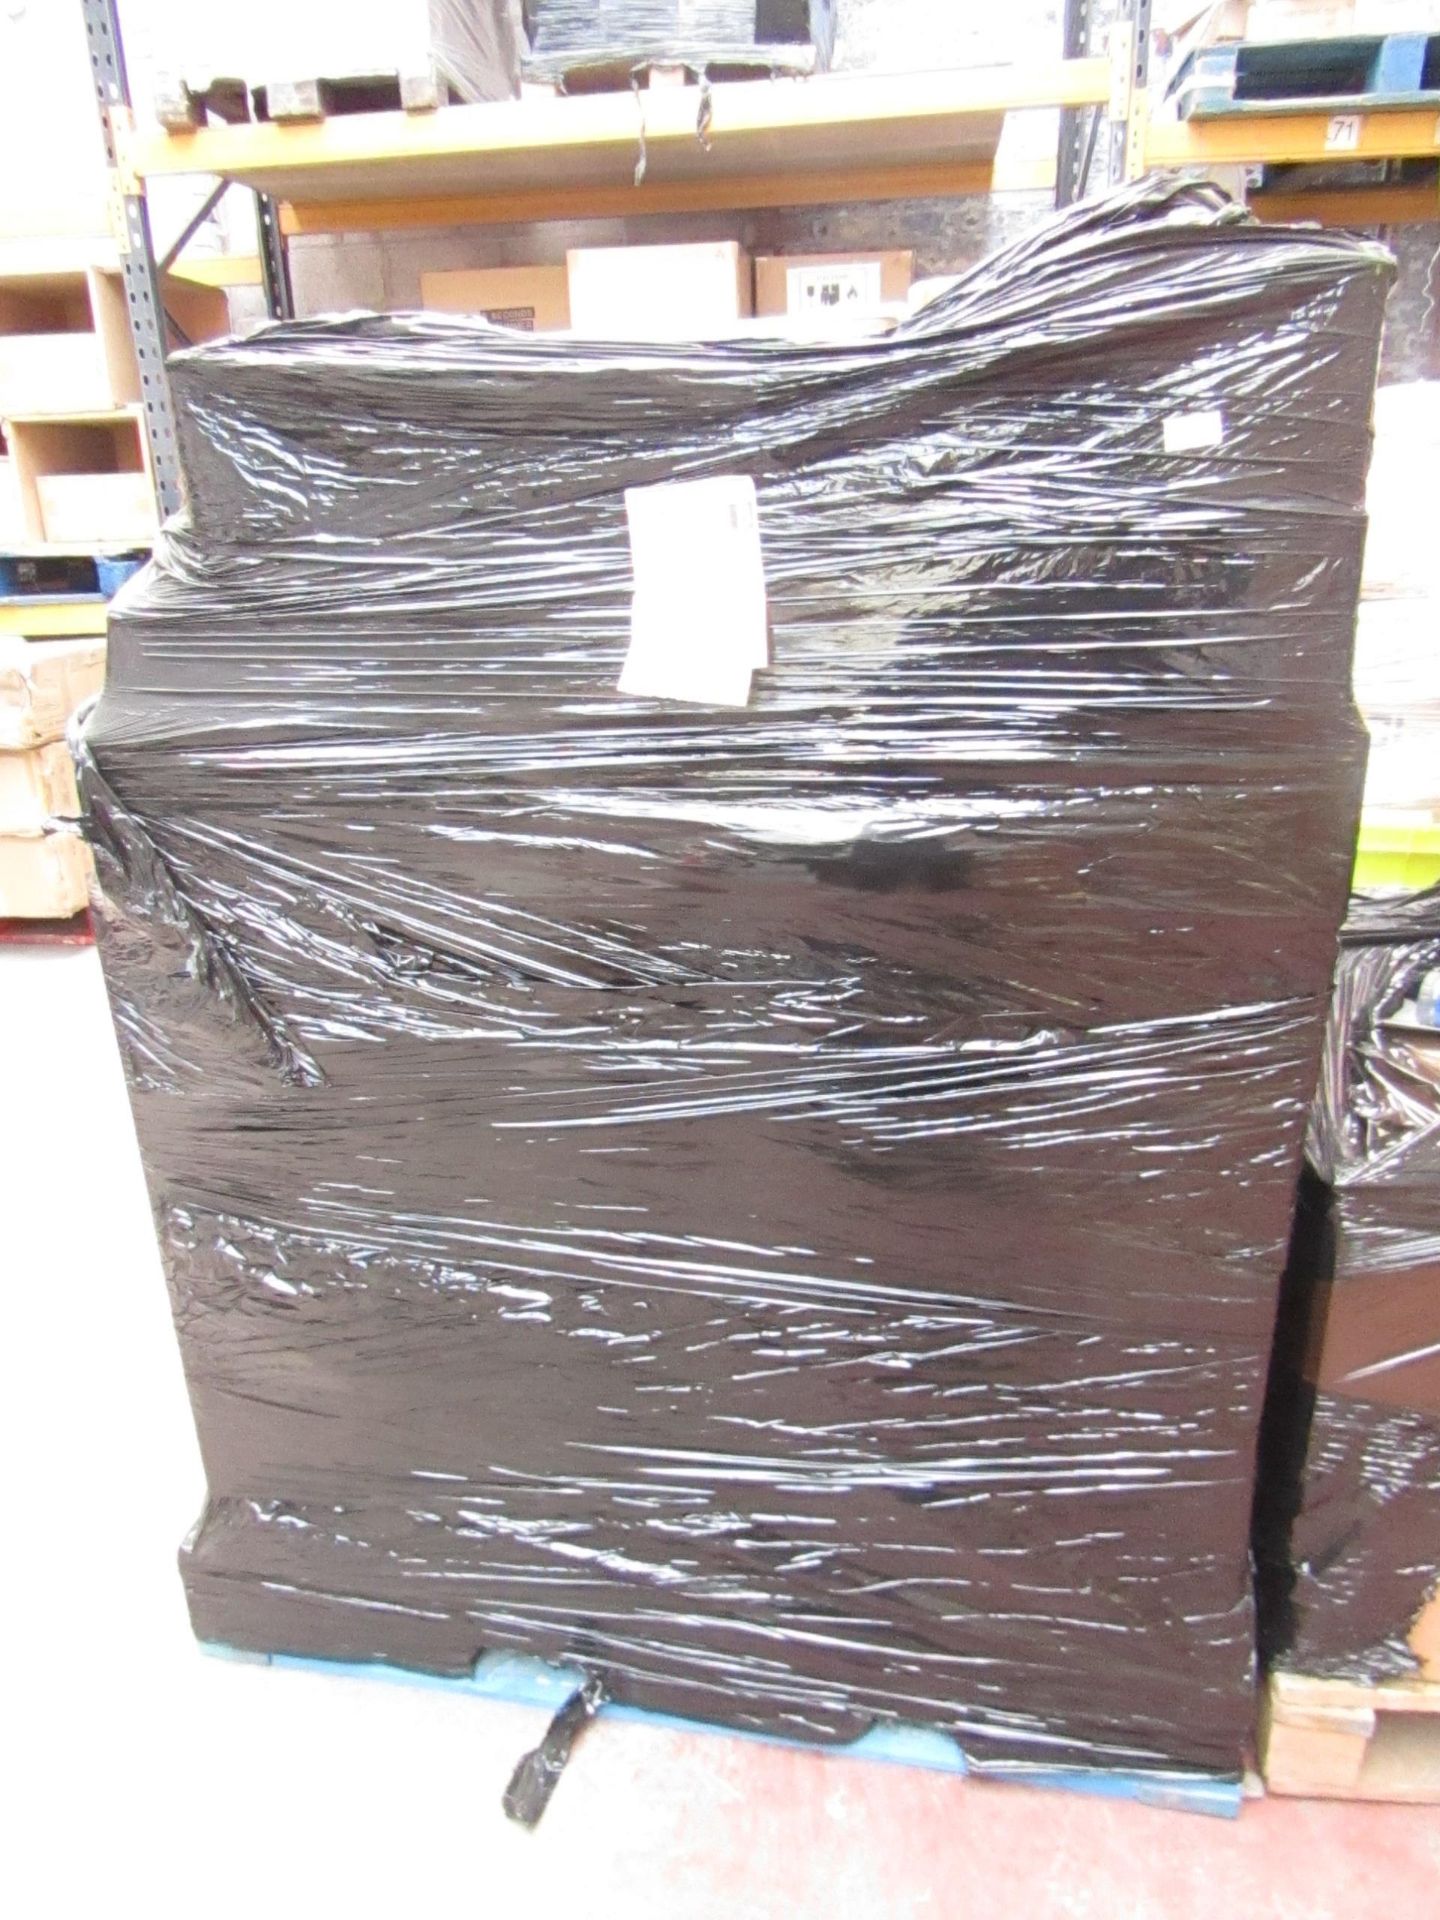 1X PALLET CONTAINING APPROX 20 HOME ELECTRICAL AND FITNESS ITEMS | THIS PALLET IS UNCHECKED AND